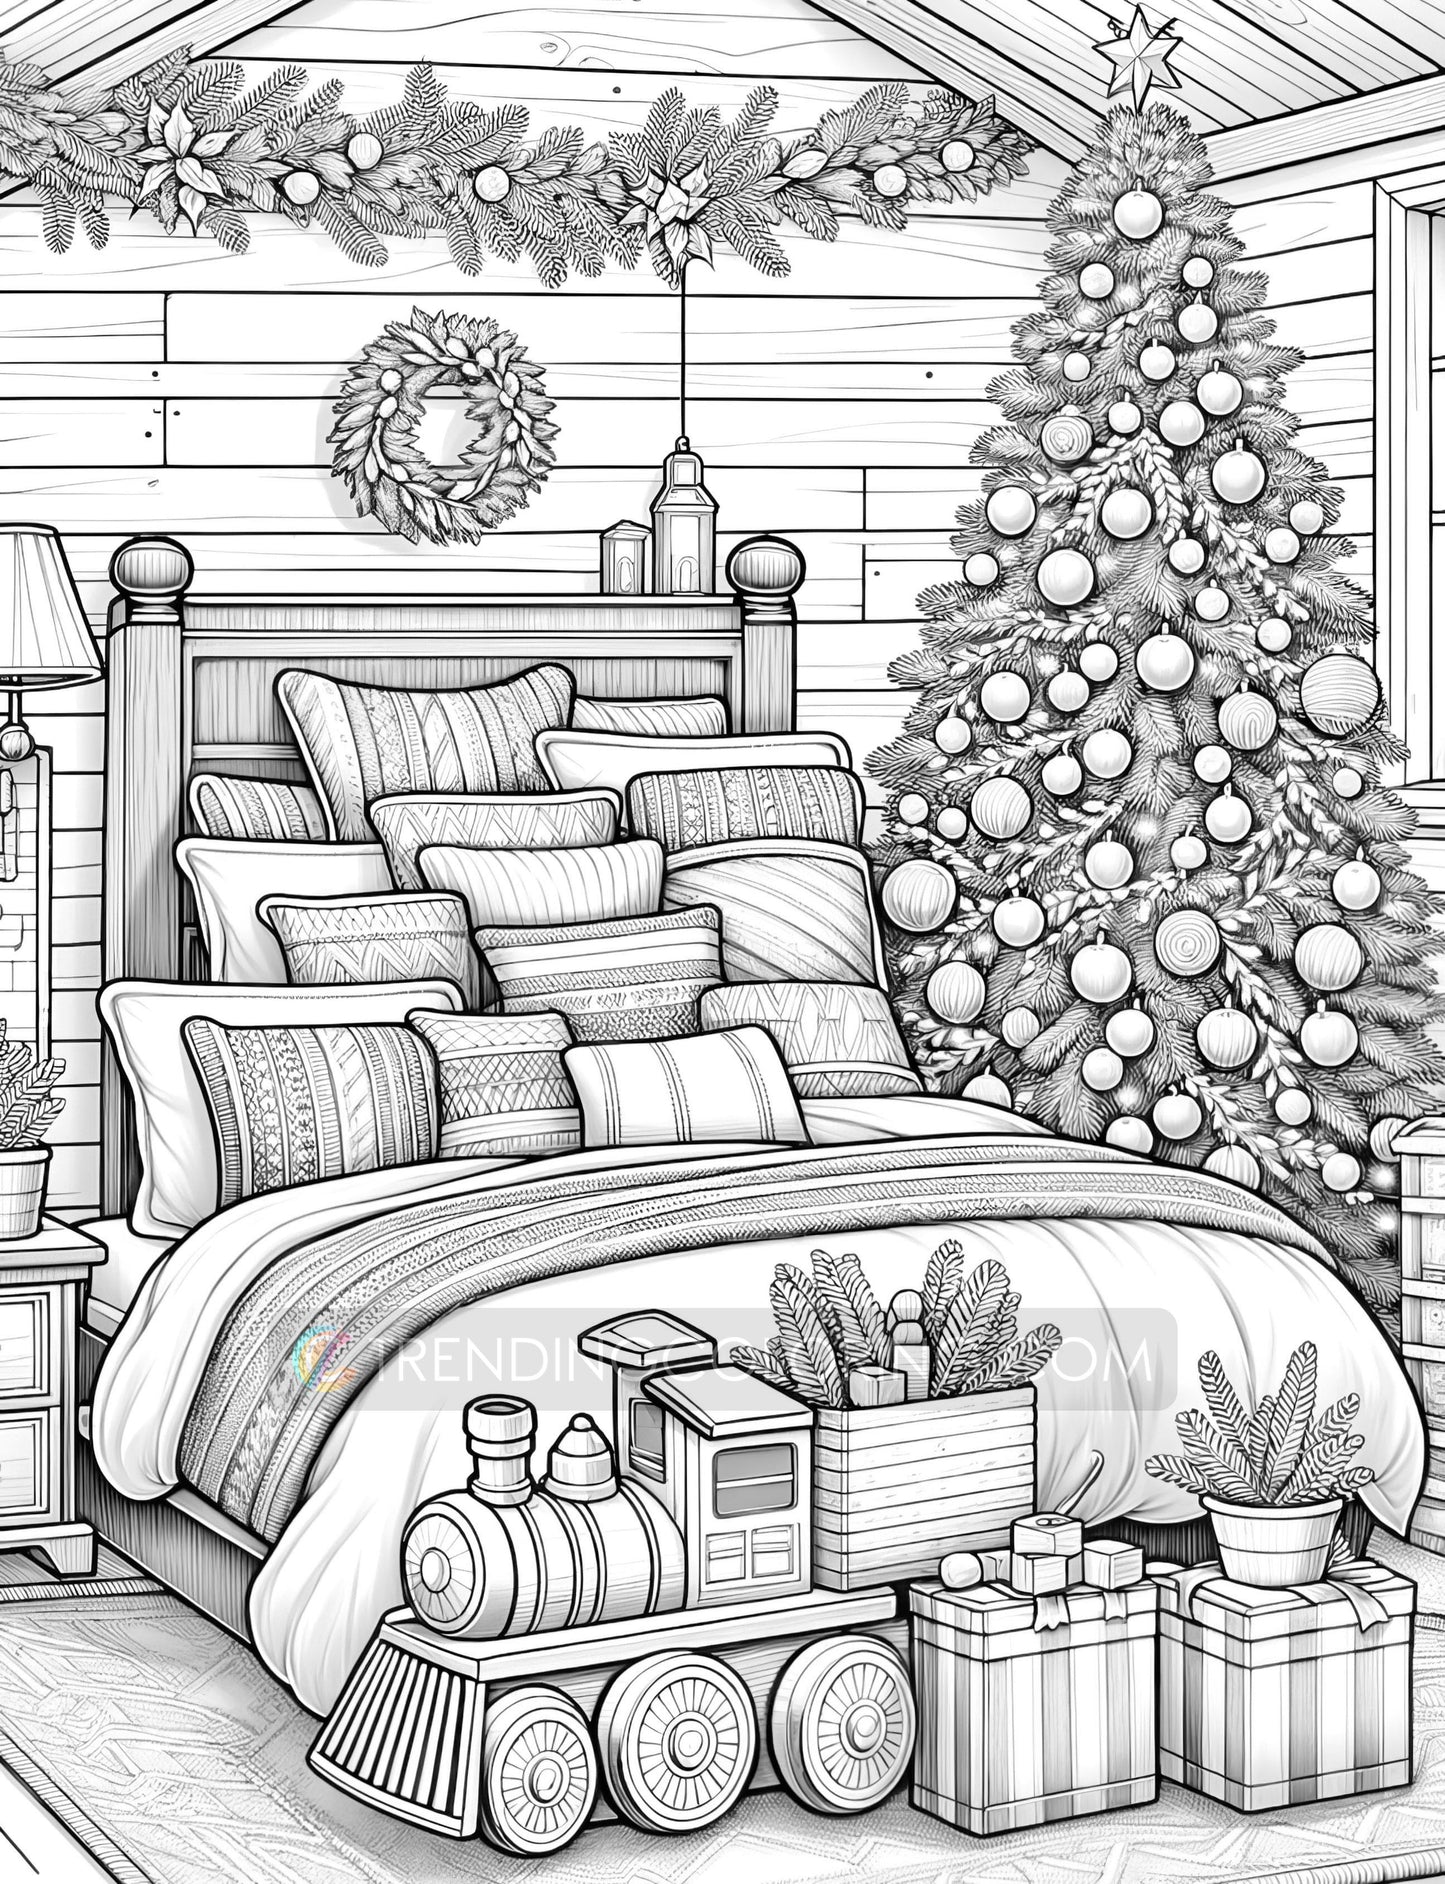 50 Christmas House Interior Grayscale Coloring Pages - Instant Download - Printable PDF Dark/Light